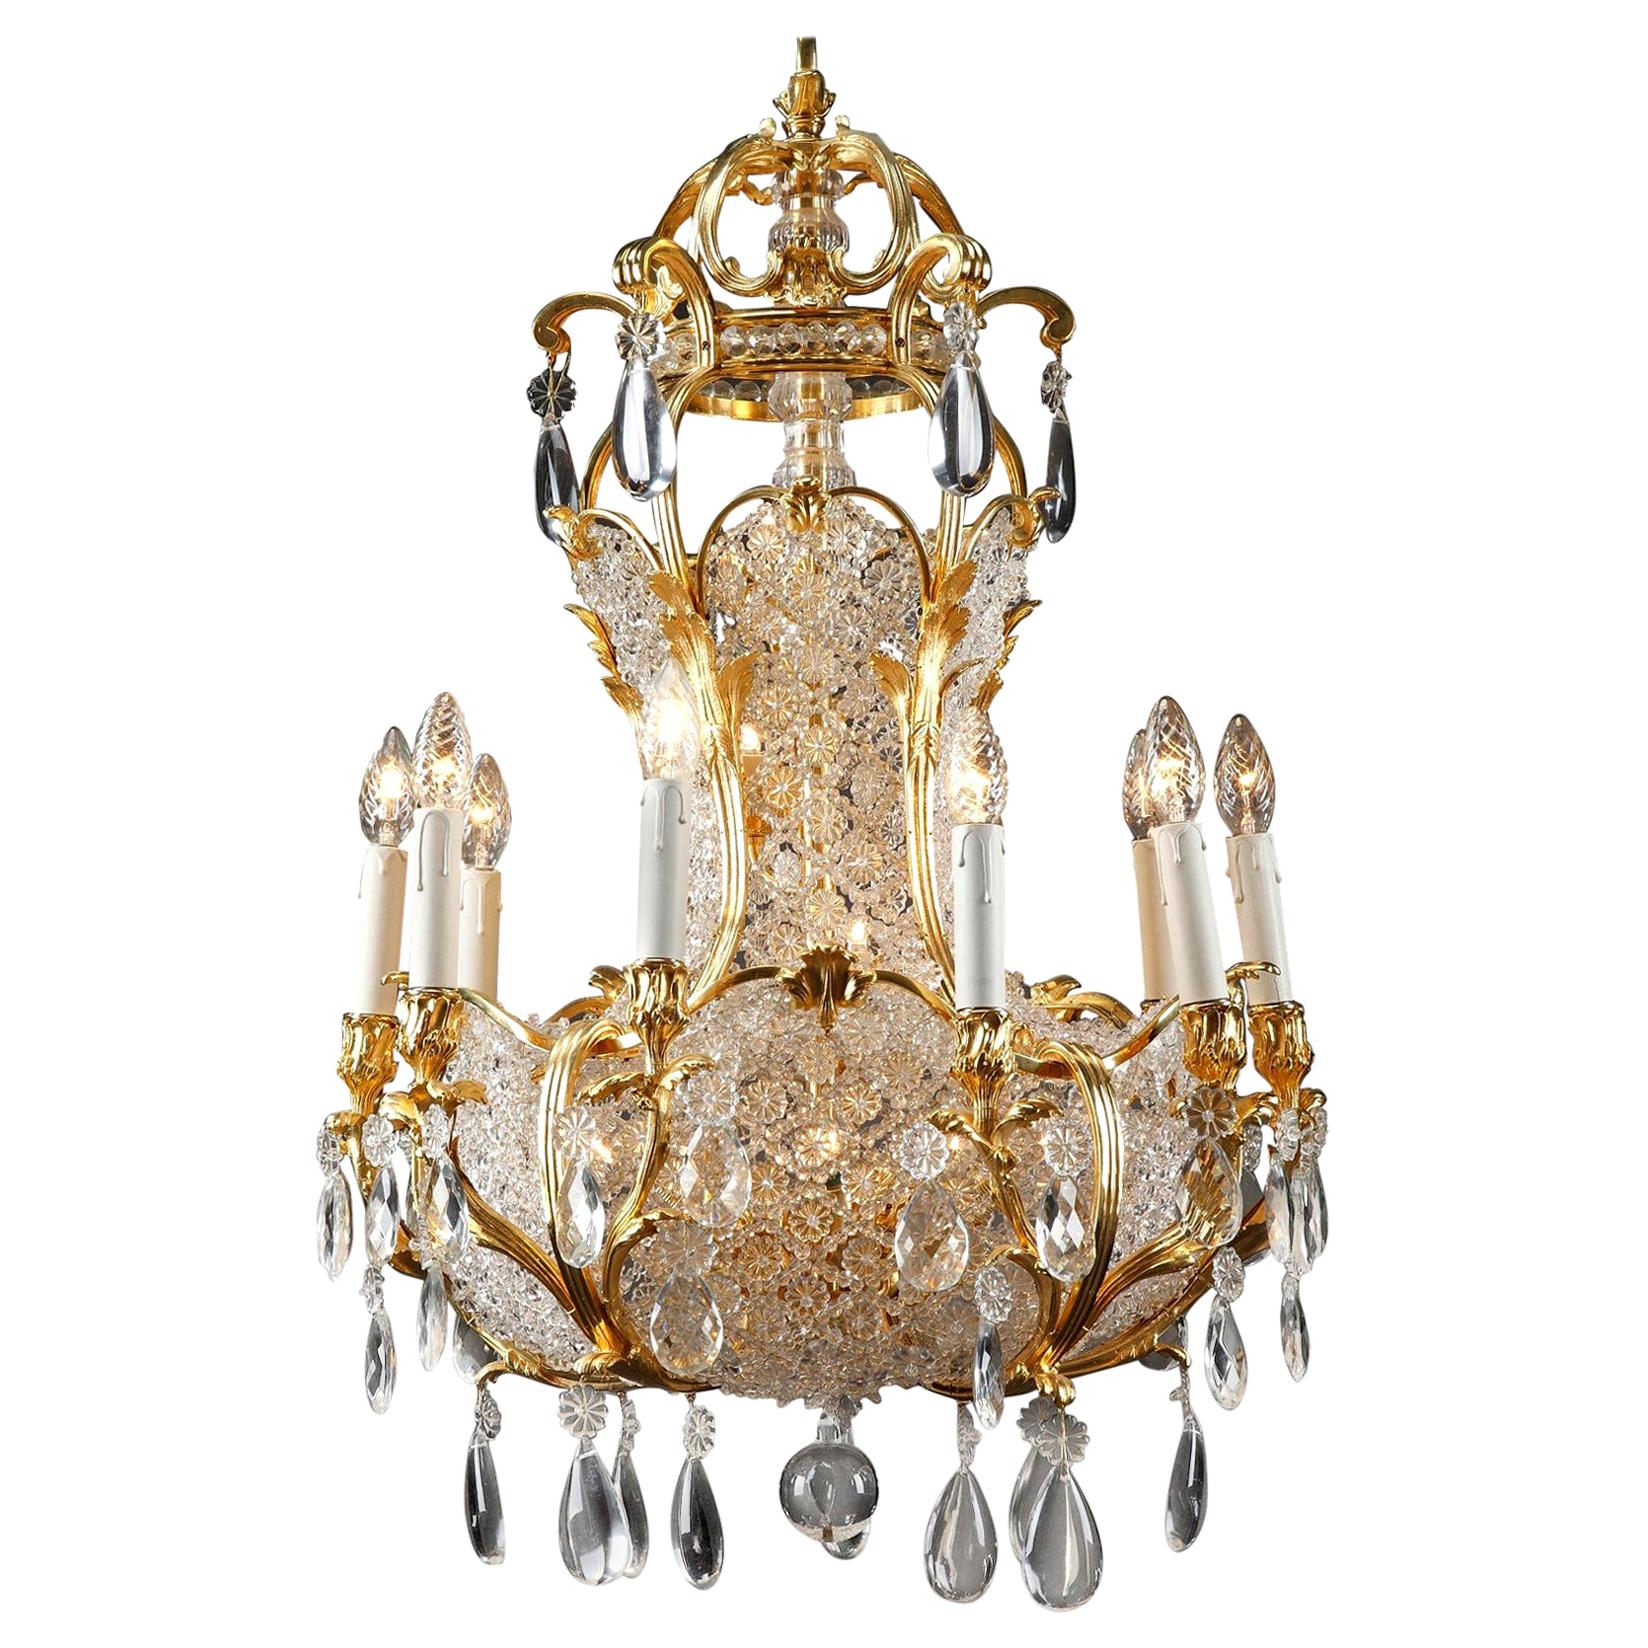 19th Century 10-Light Ormolu and Crystal Basket-Shaped Chandelier For Sale